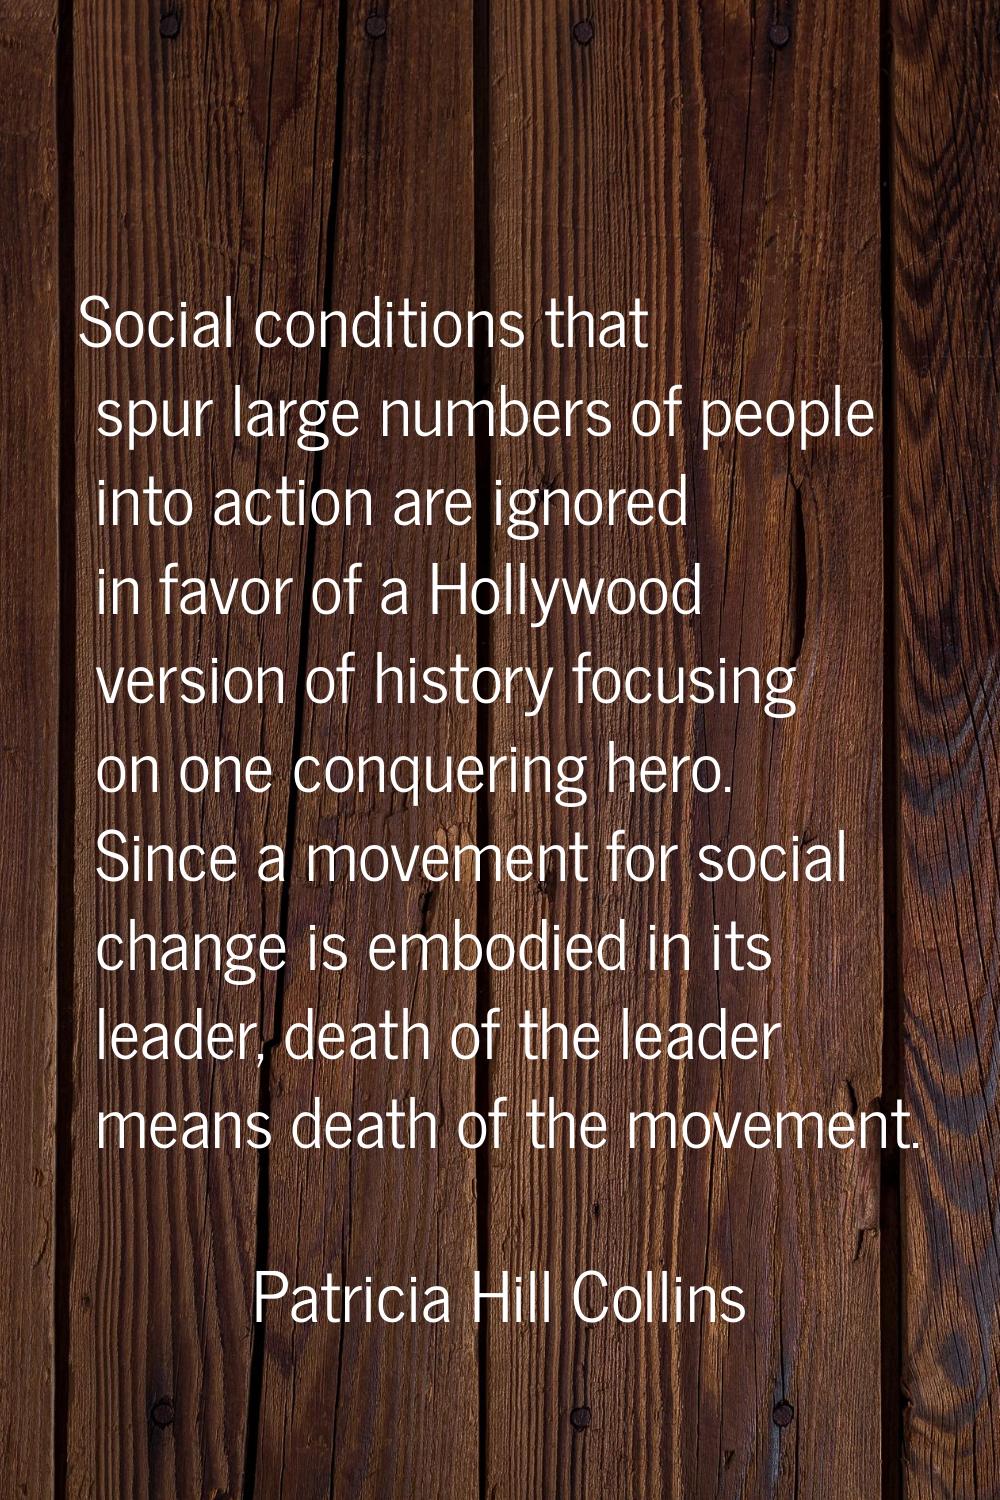 Social conditions that spur large numbers of people into action are ignored in favor of a Hollywood